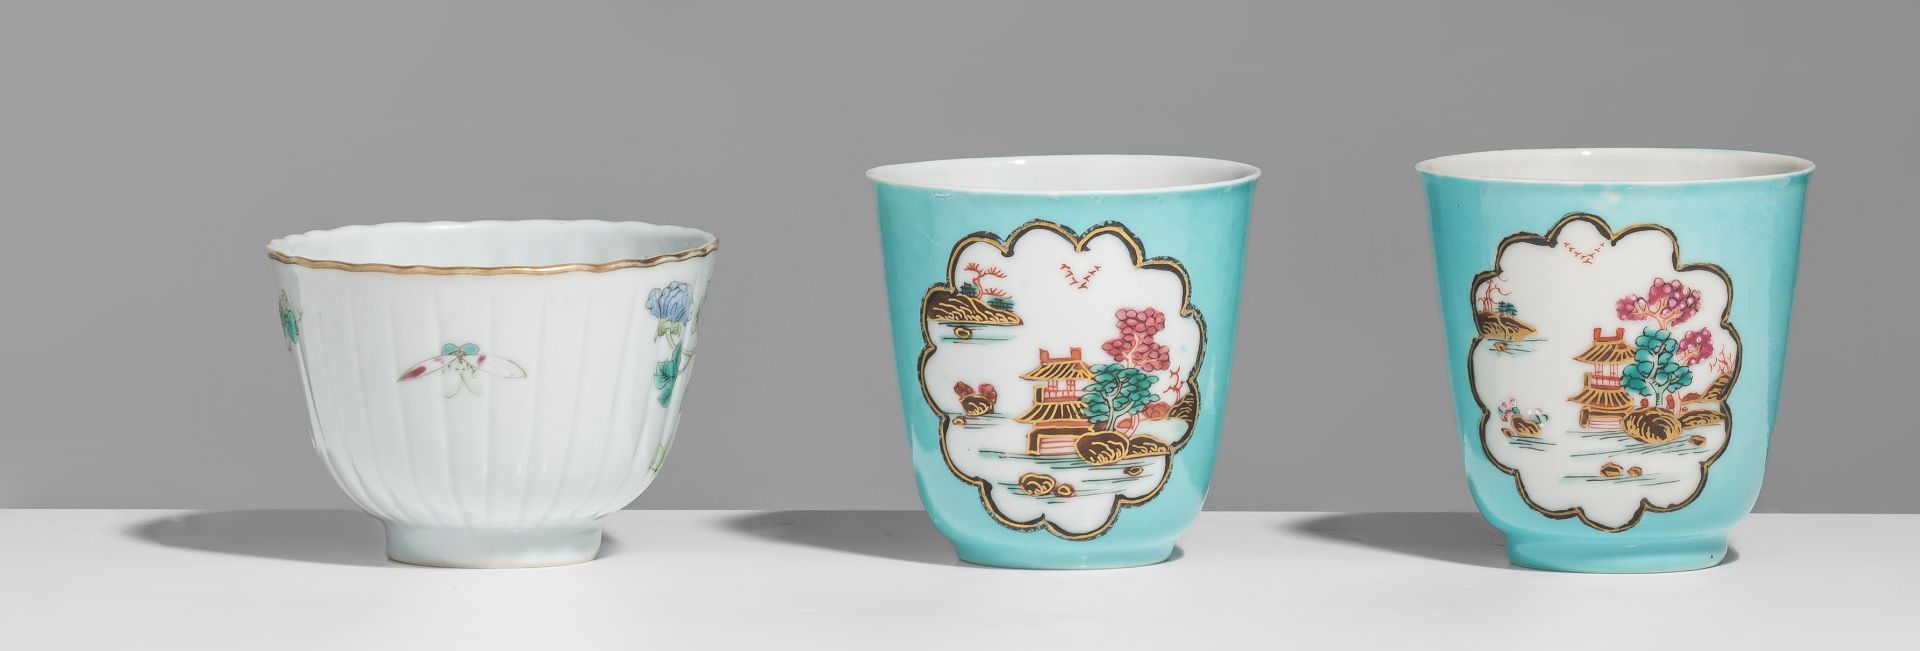 Two rare sets of Meissen-inspired Chinese export porcelain cups and saucers, 18thC, tallest H 7,5 cm - Image 6 of 10